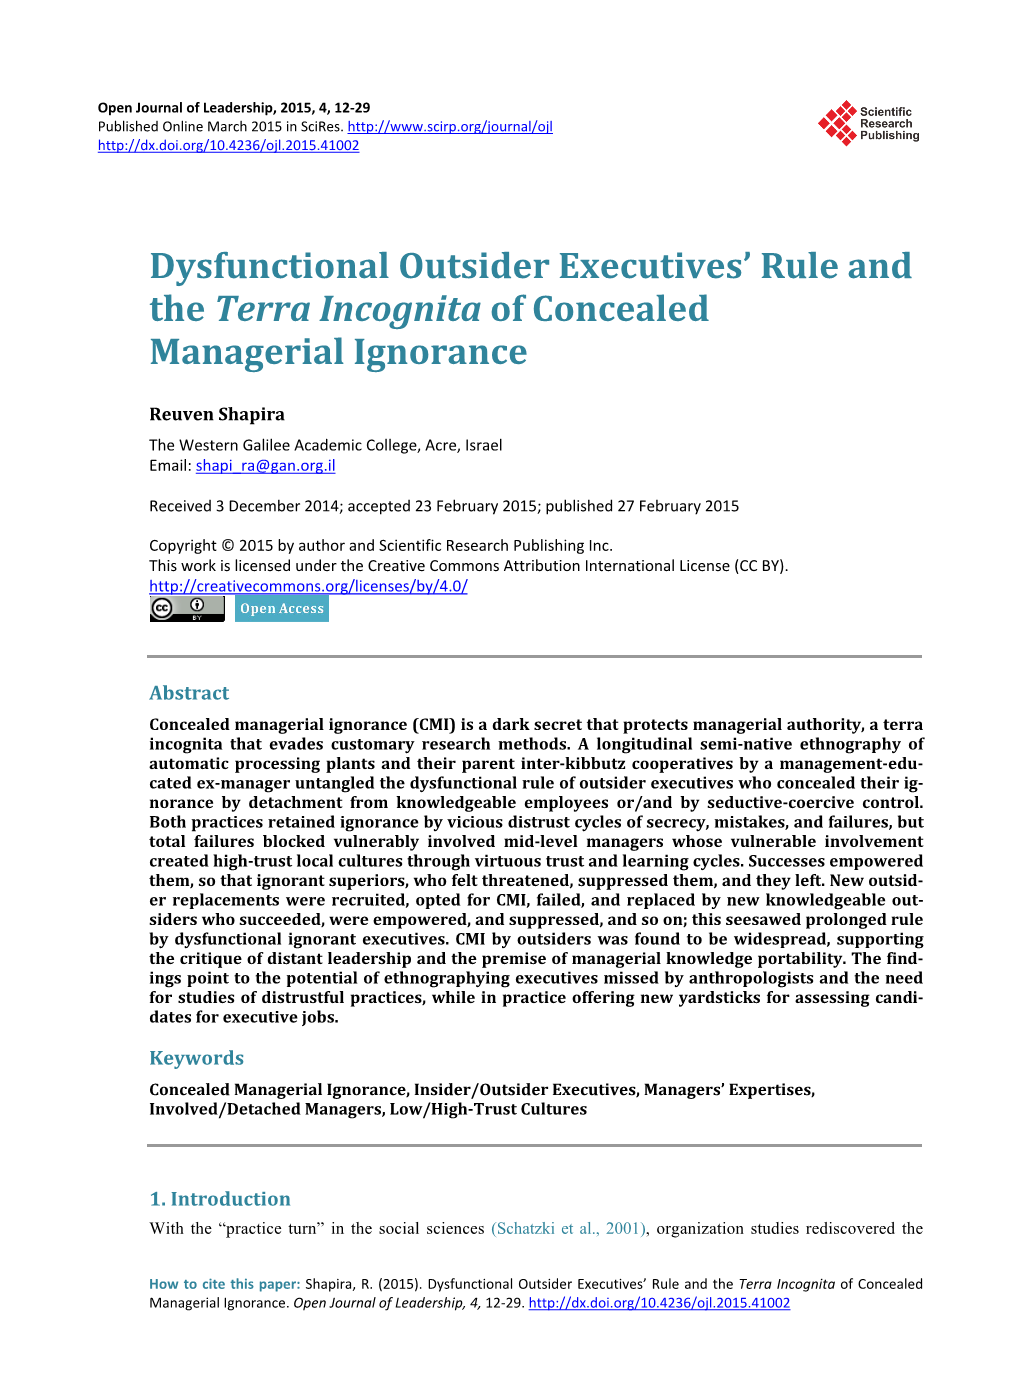 Dysfunctional Outsider Executives' Rule and the Terra Incognita Of